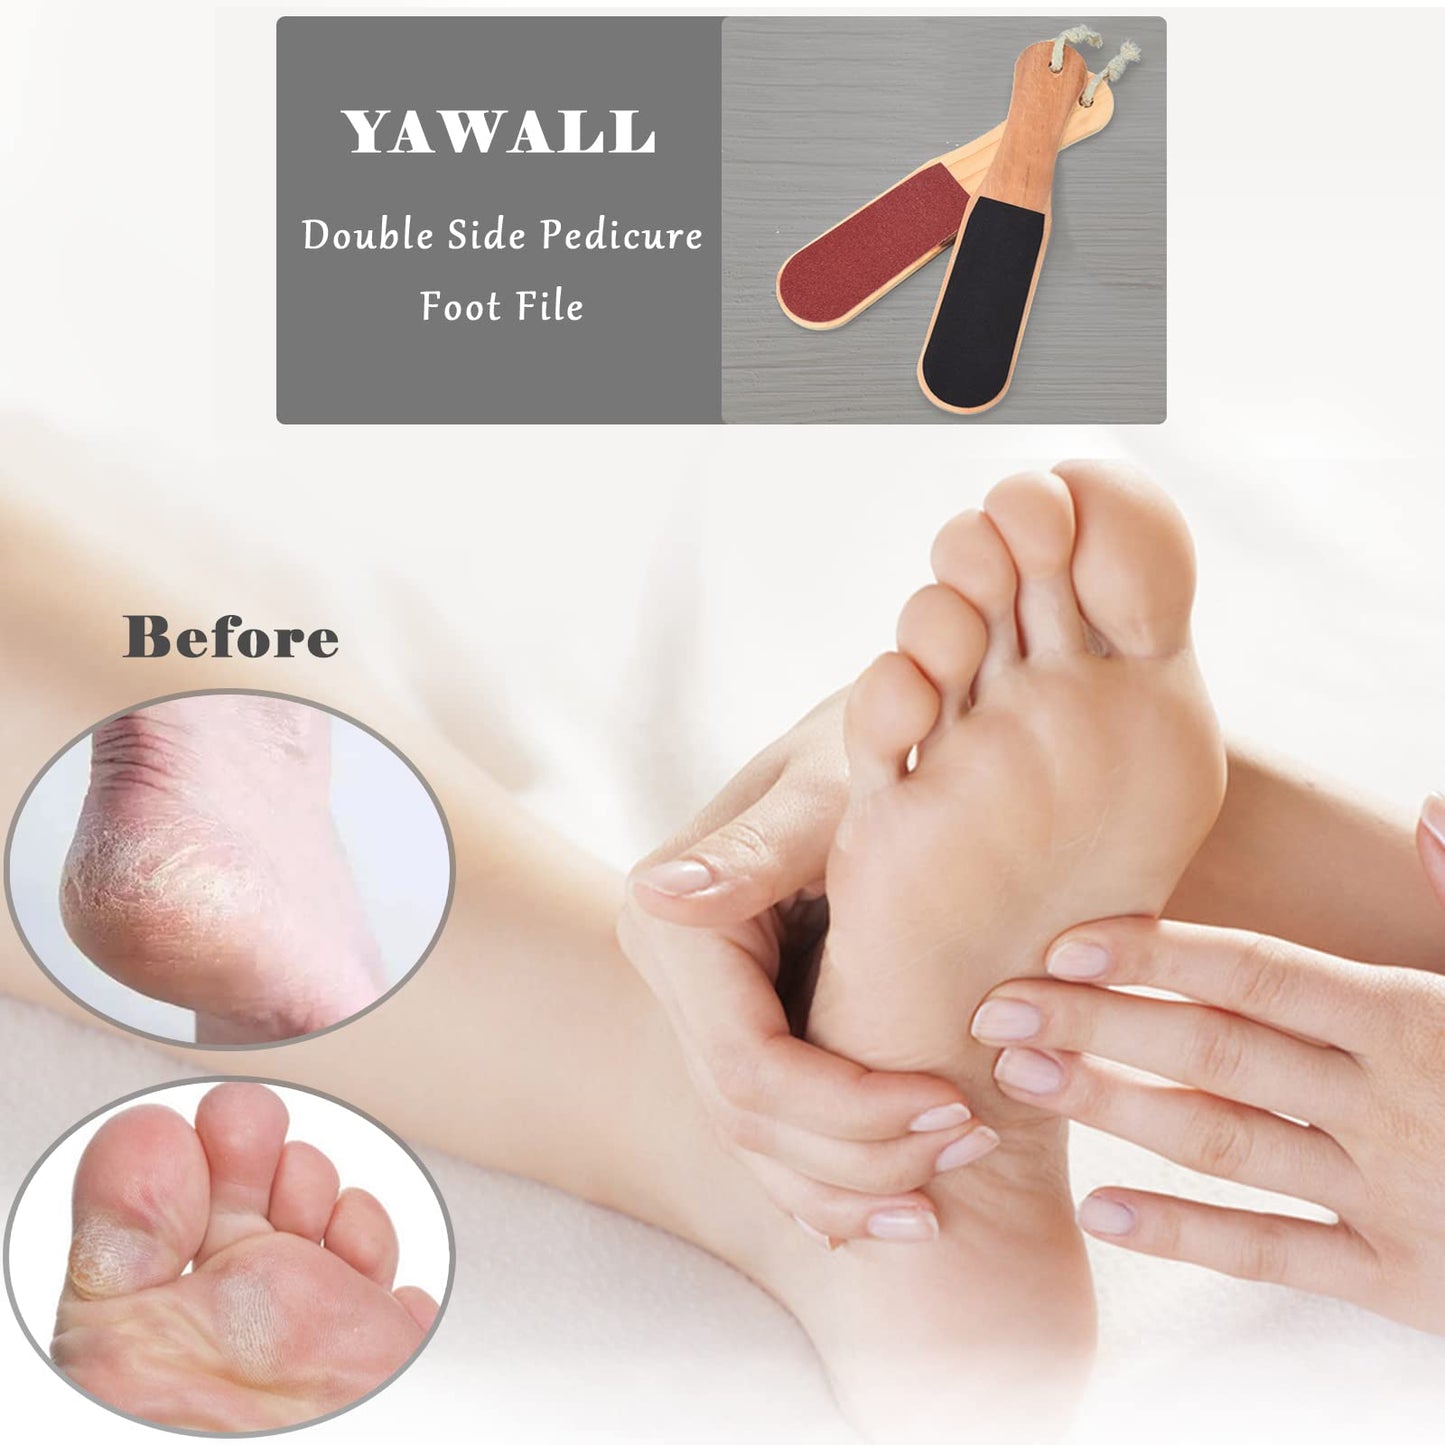 YAWALL Foot File Wooden Pedicure Feet Scrubber with Handle for Callus, Dry, and Dead Skin Removal Heel Scraper for Feet, Hands, and Body Exfoliation Perfect Foot Filer for Use in Shower